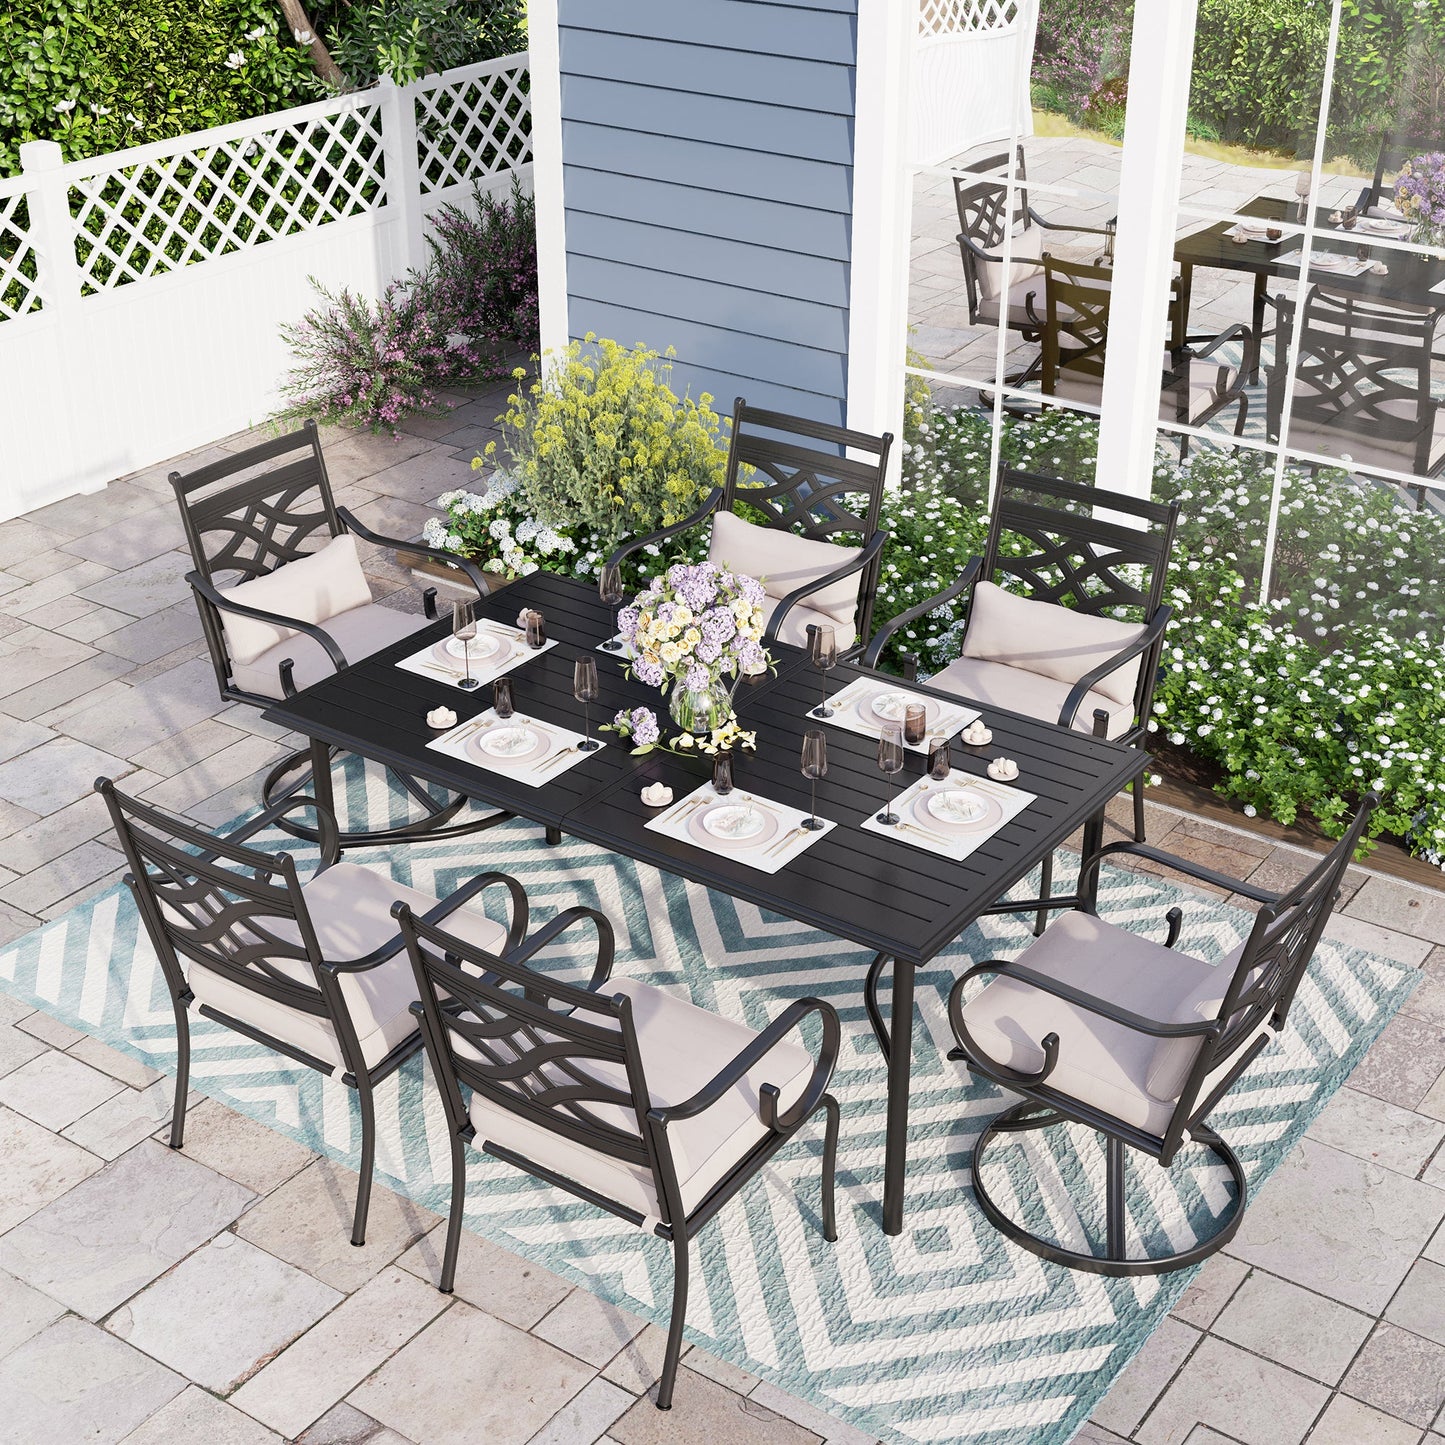 Sophia & William 7 Piece Outdoor Patio Dining Set Modern Metal Table with Cushioned Chairs